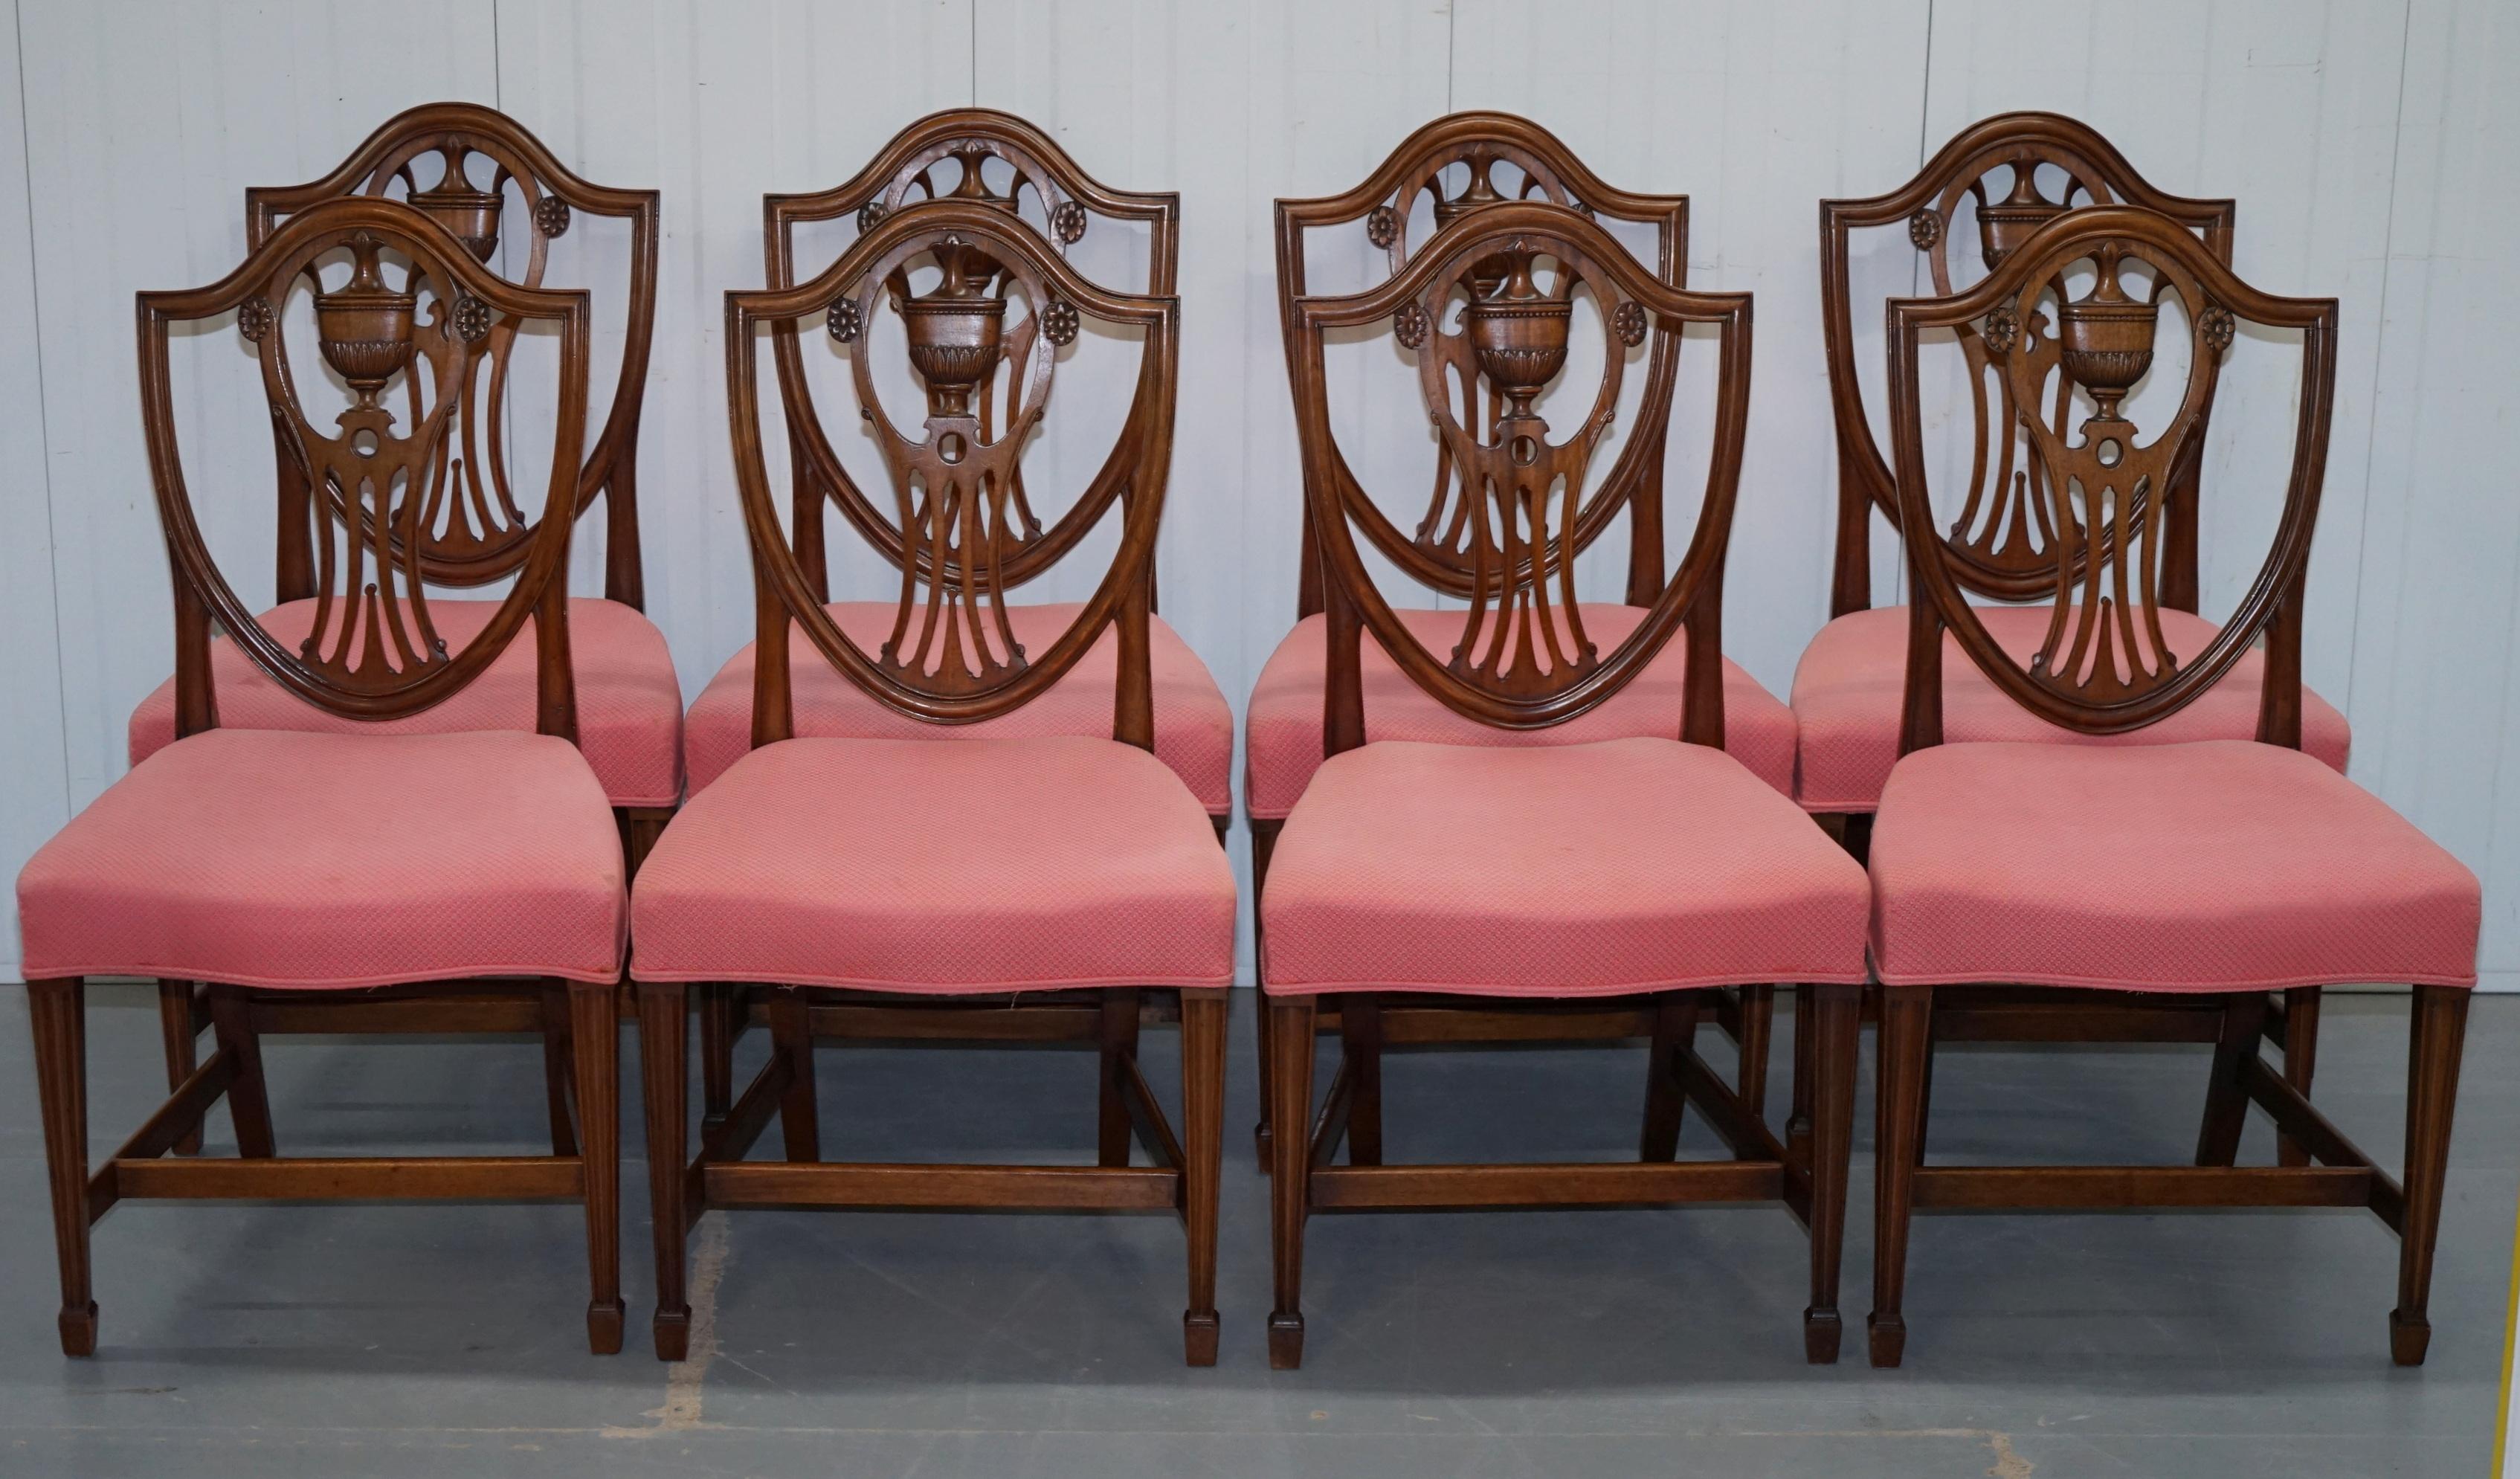 We are delighted to offer for sale this extremely rare set of 10 original fully stamped Gillow & Co Sheraton back antique mahogany dining chairs.

These chairs are in need of new upholstery as there are some stains and the odd hole, I can have the